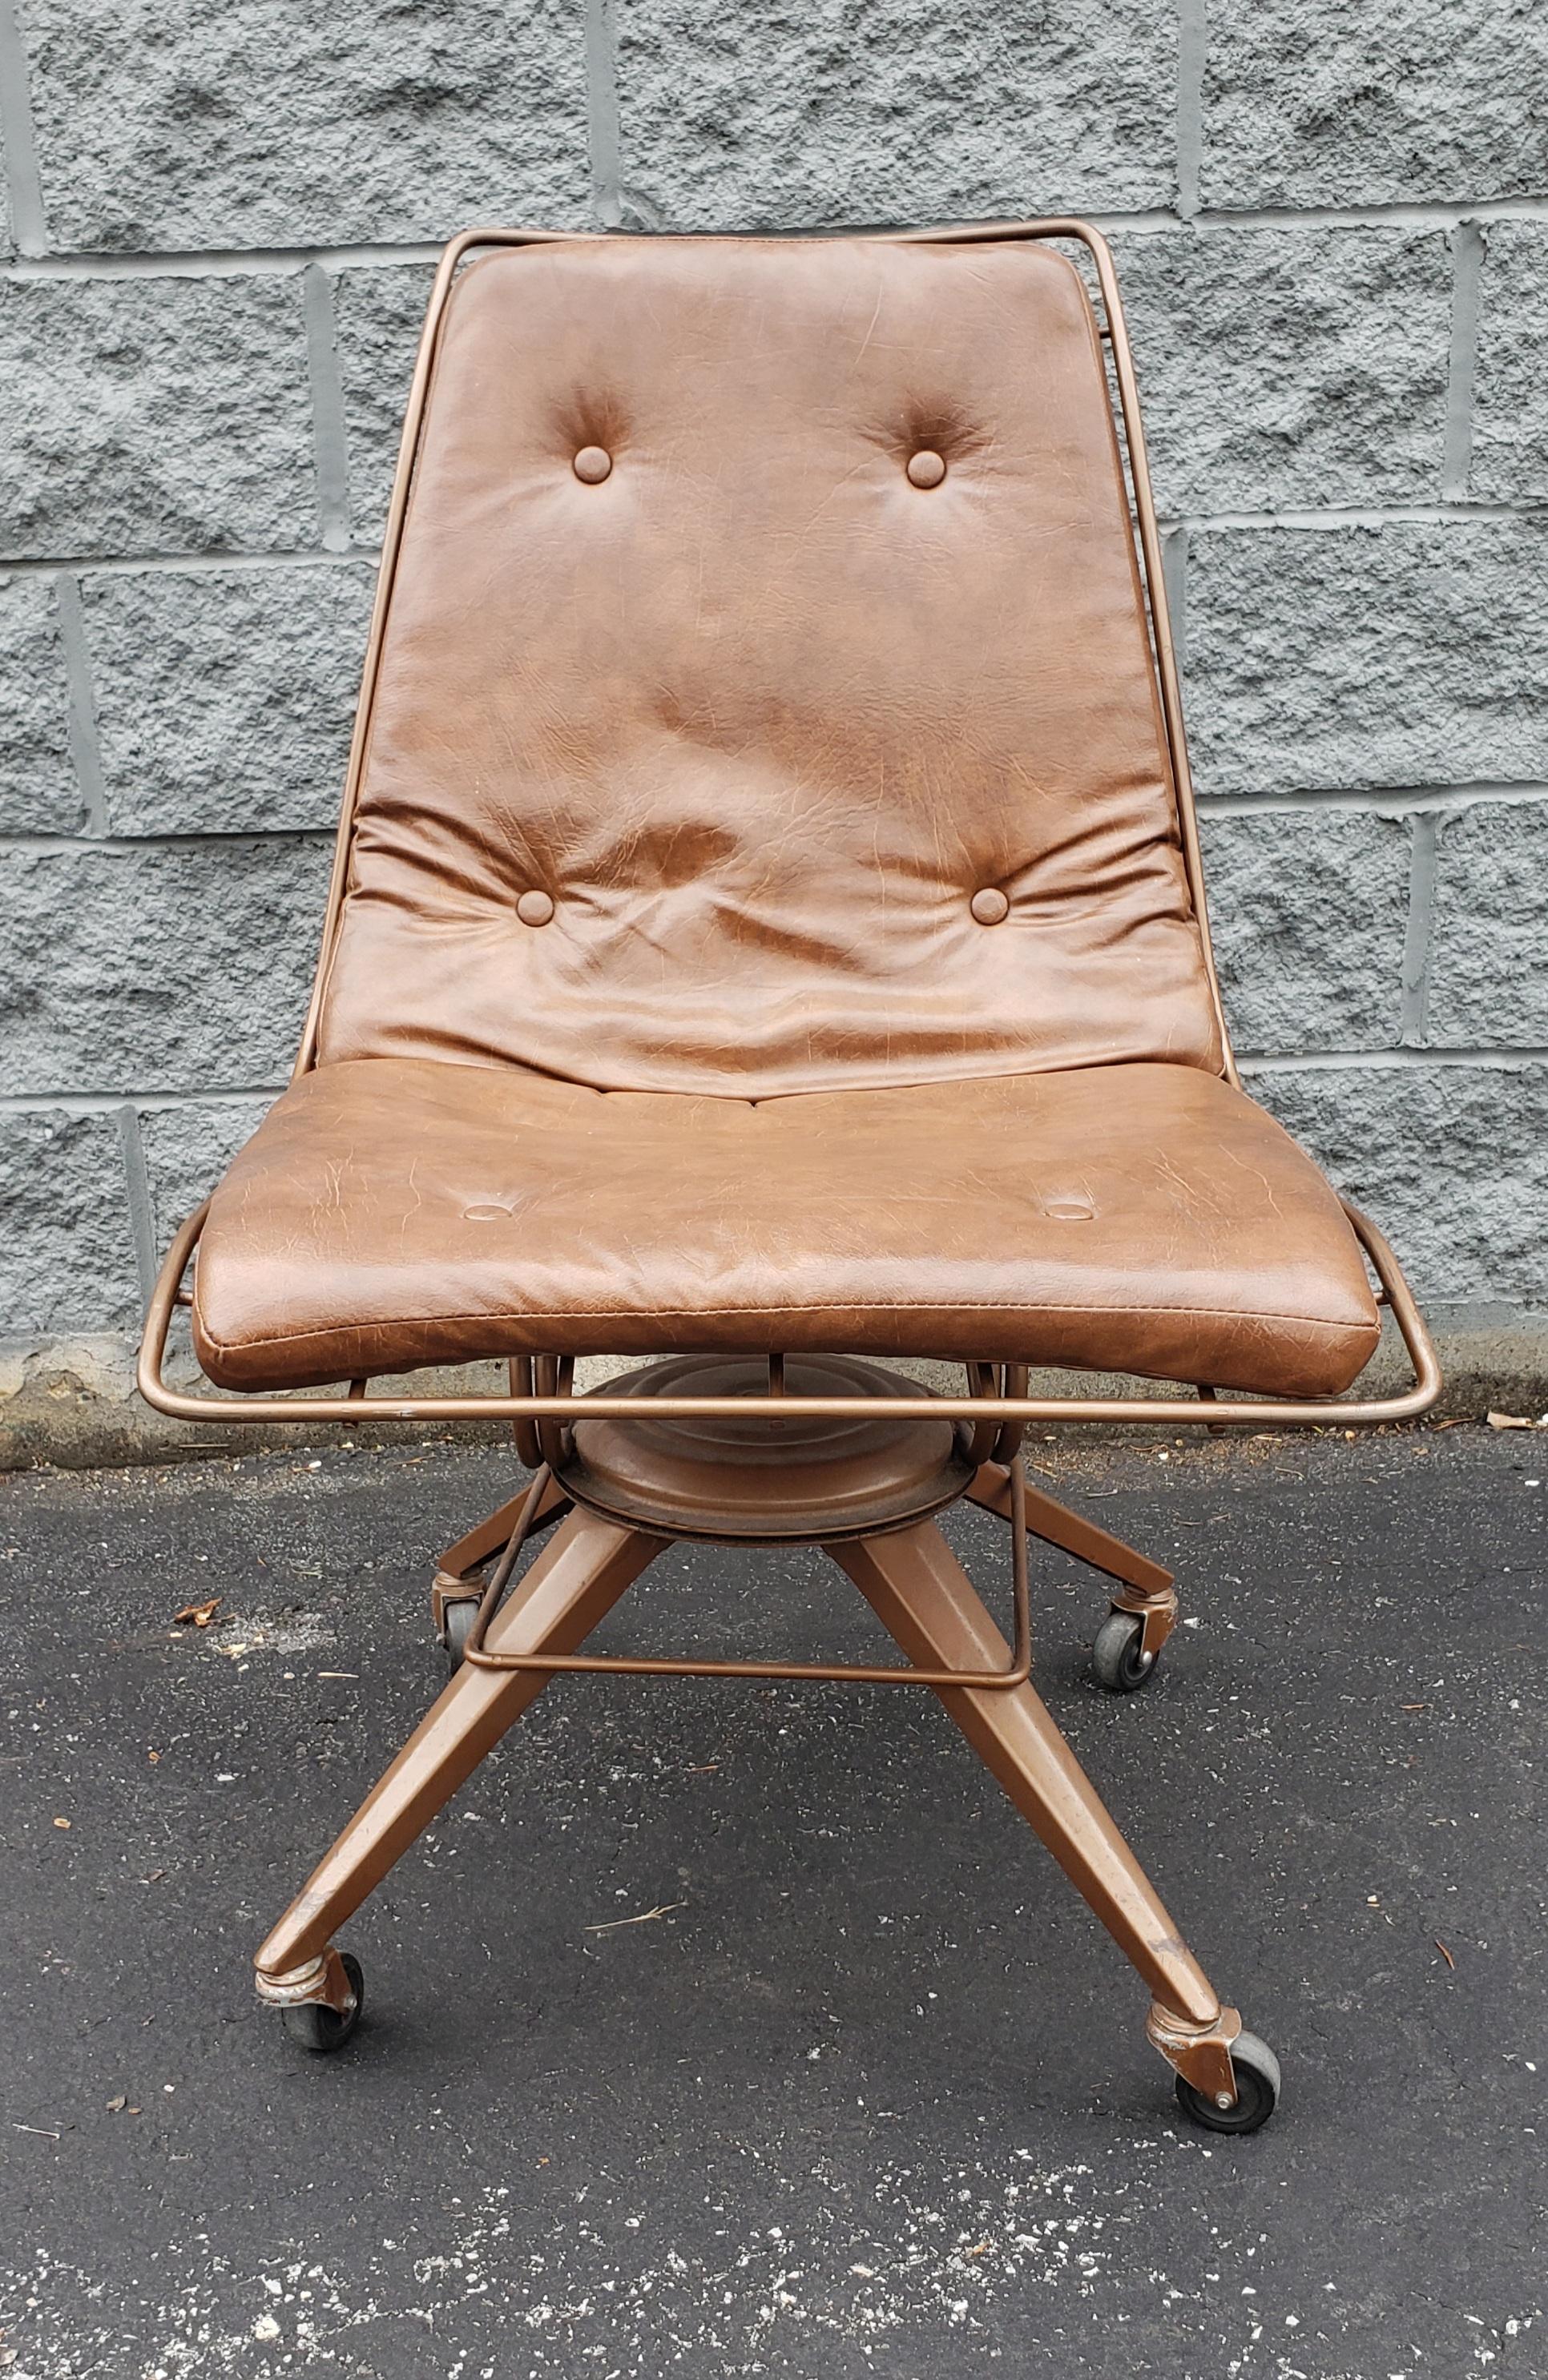 A rare midcentury metal swiveling office chair on wheels with PU leather seat and back cushion. Very good vintage condition.
Chair measures 21